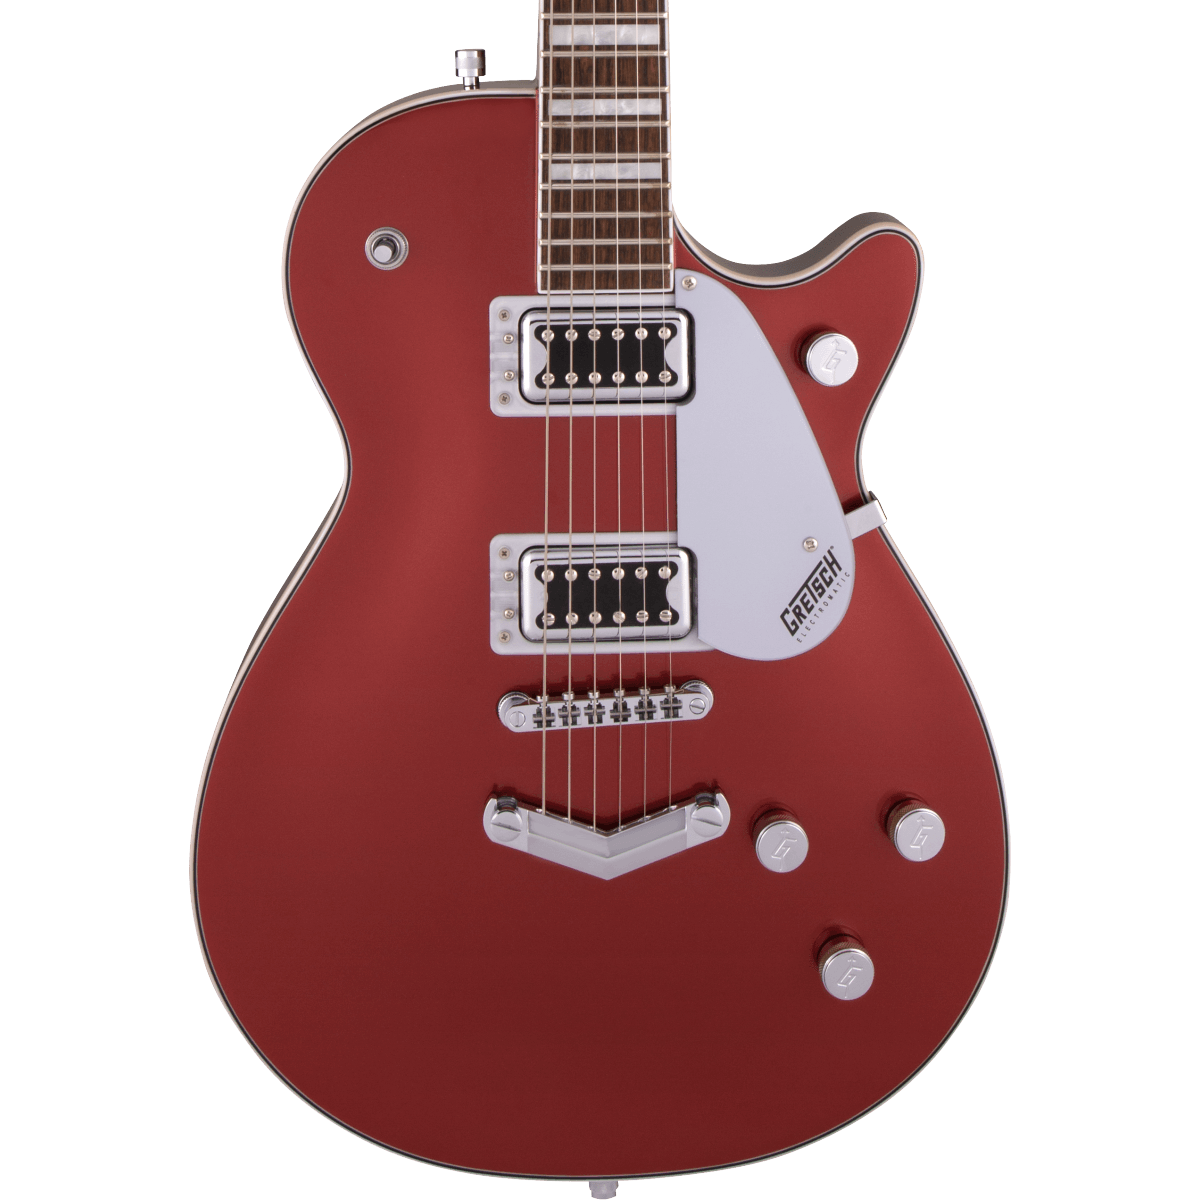 Gretsch G5220 - $335.99 at samash.com with promo code DEEP - Free Shipping (Firestick Red or Jade Gray)